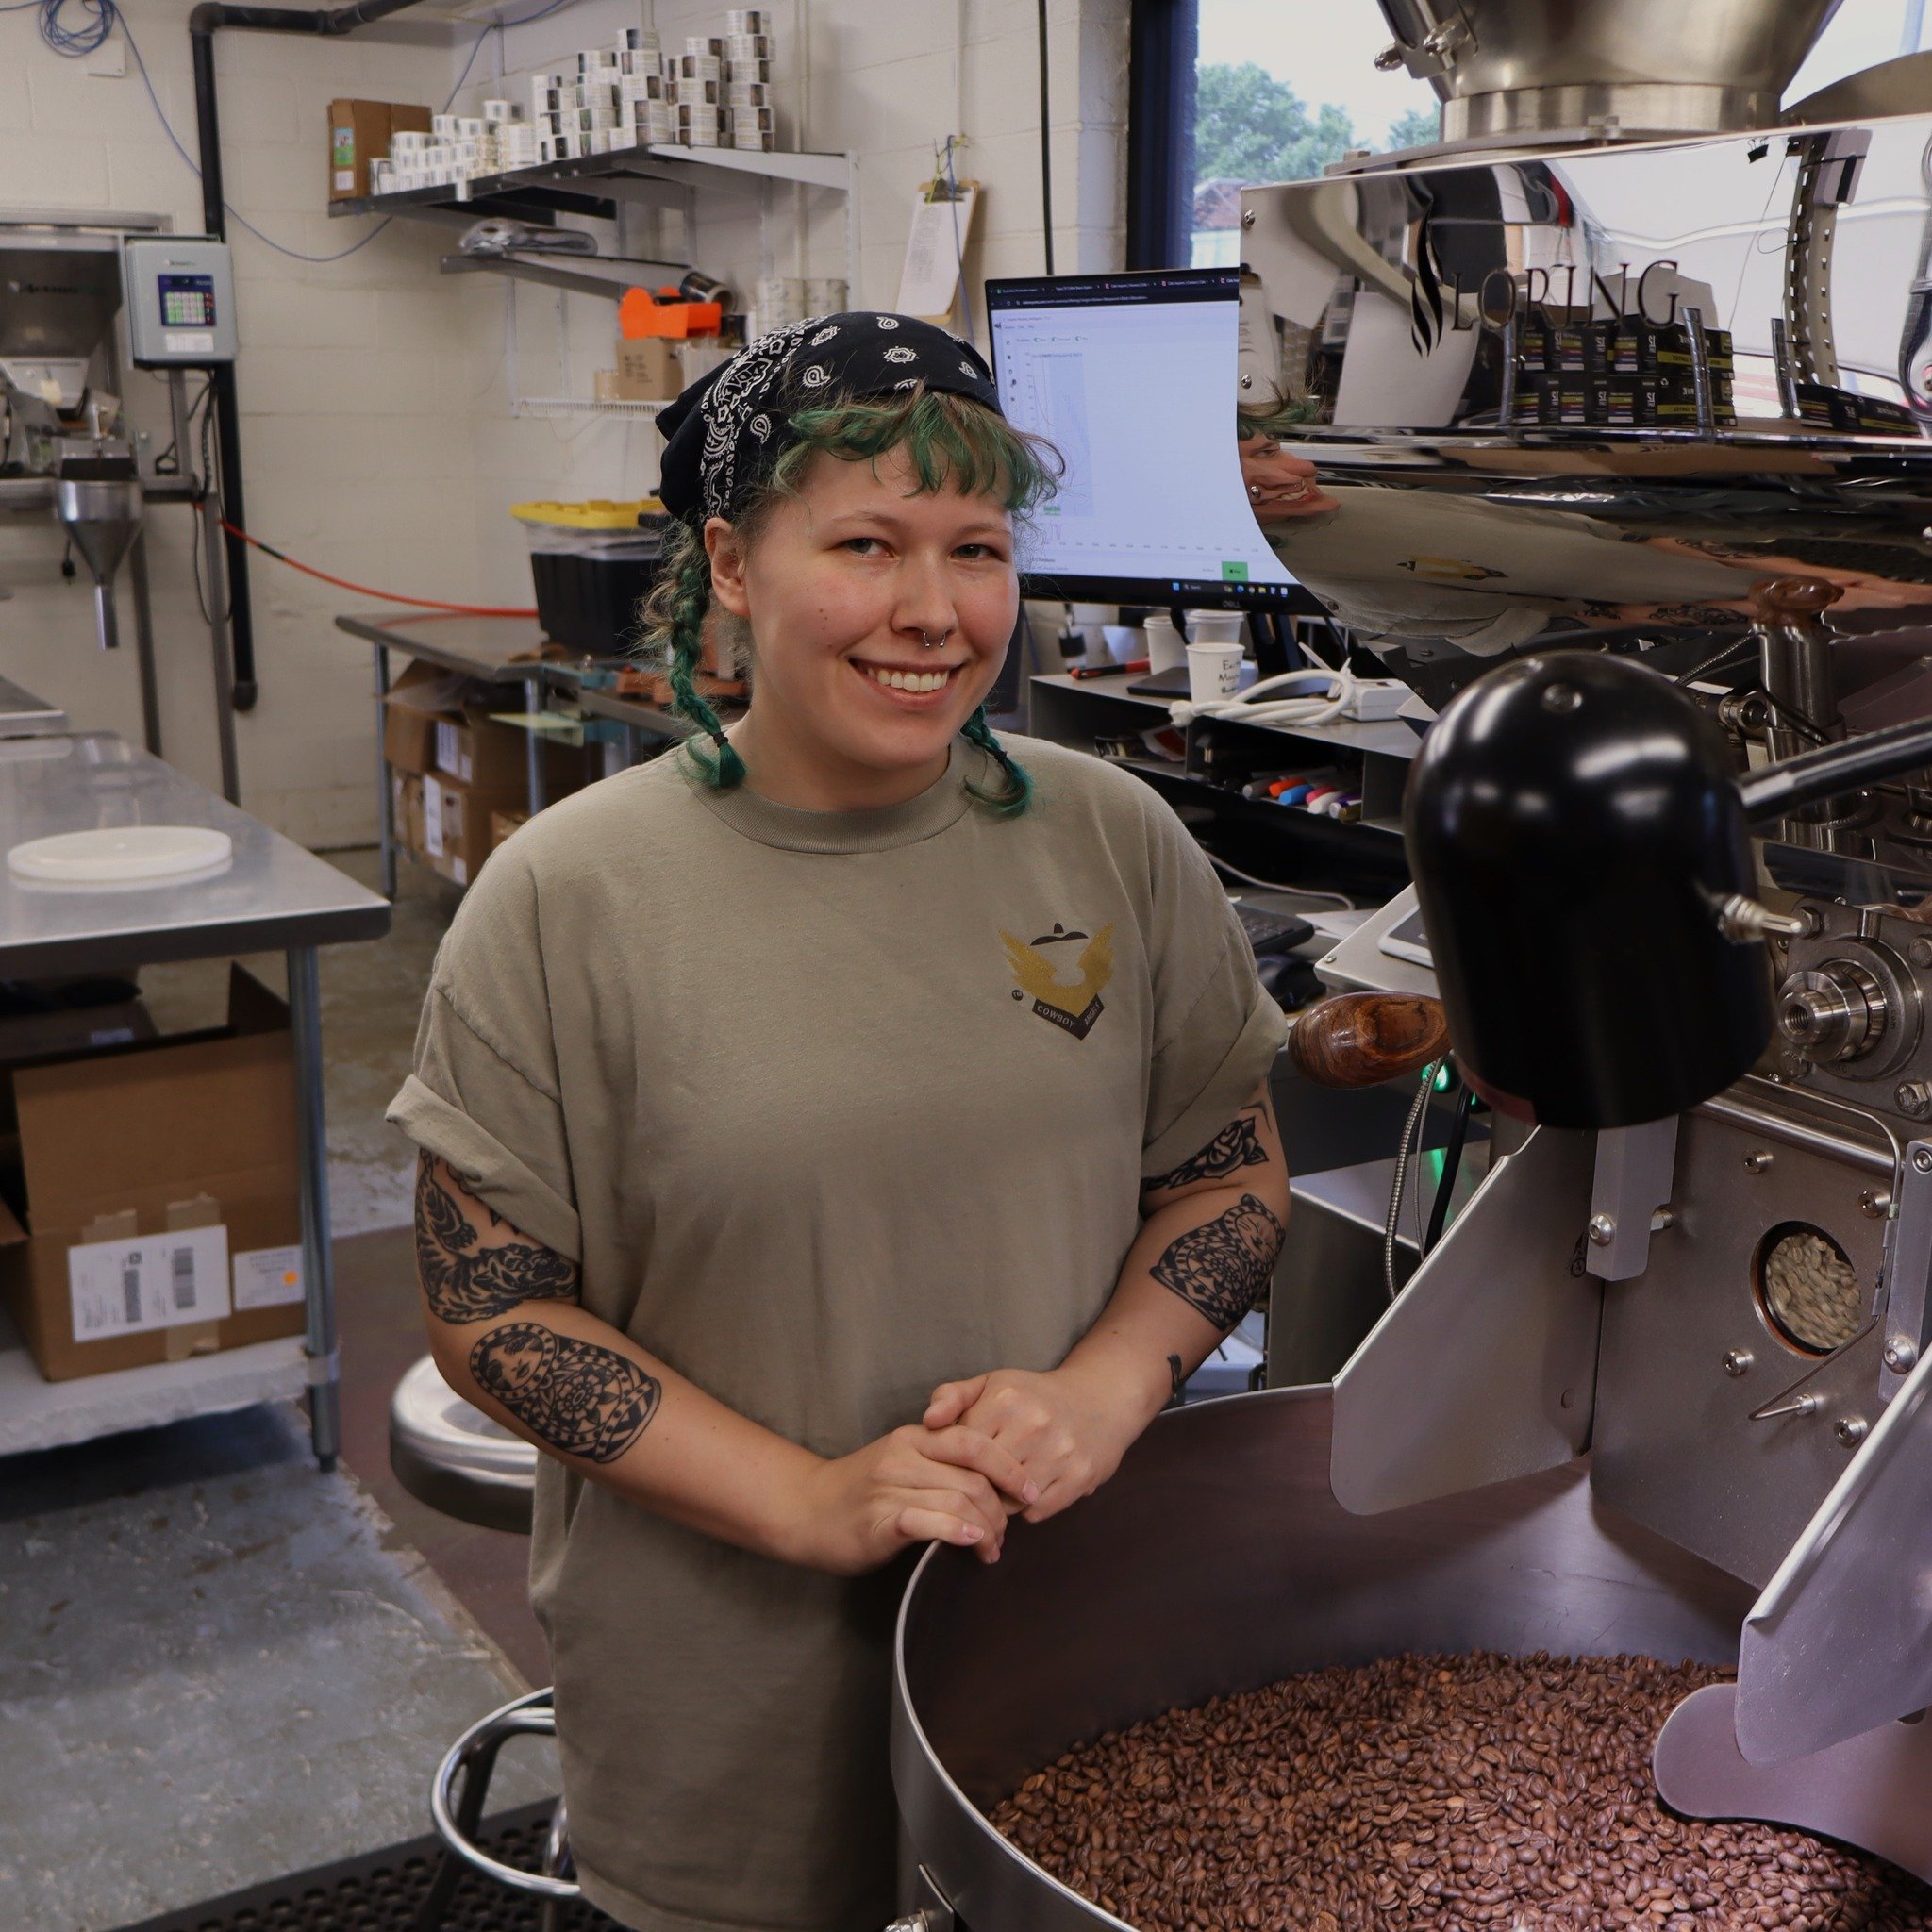 For those who don't know, this is KATRINA. She is wearing some BIG SHOES these days as she officially took over as Lead Roaster and Director of Coffee with Oscar's departure. Katrina has been with us since 2022 when we took over Mojo's in Newton. She